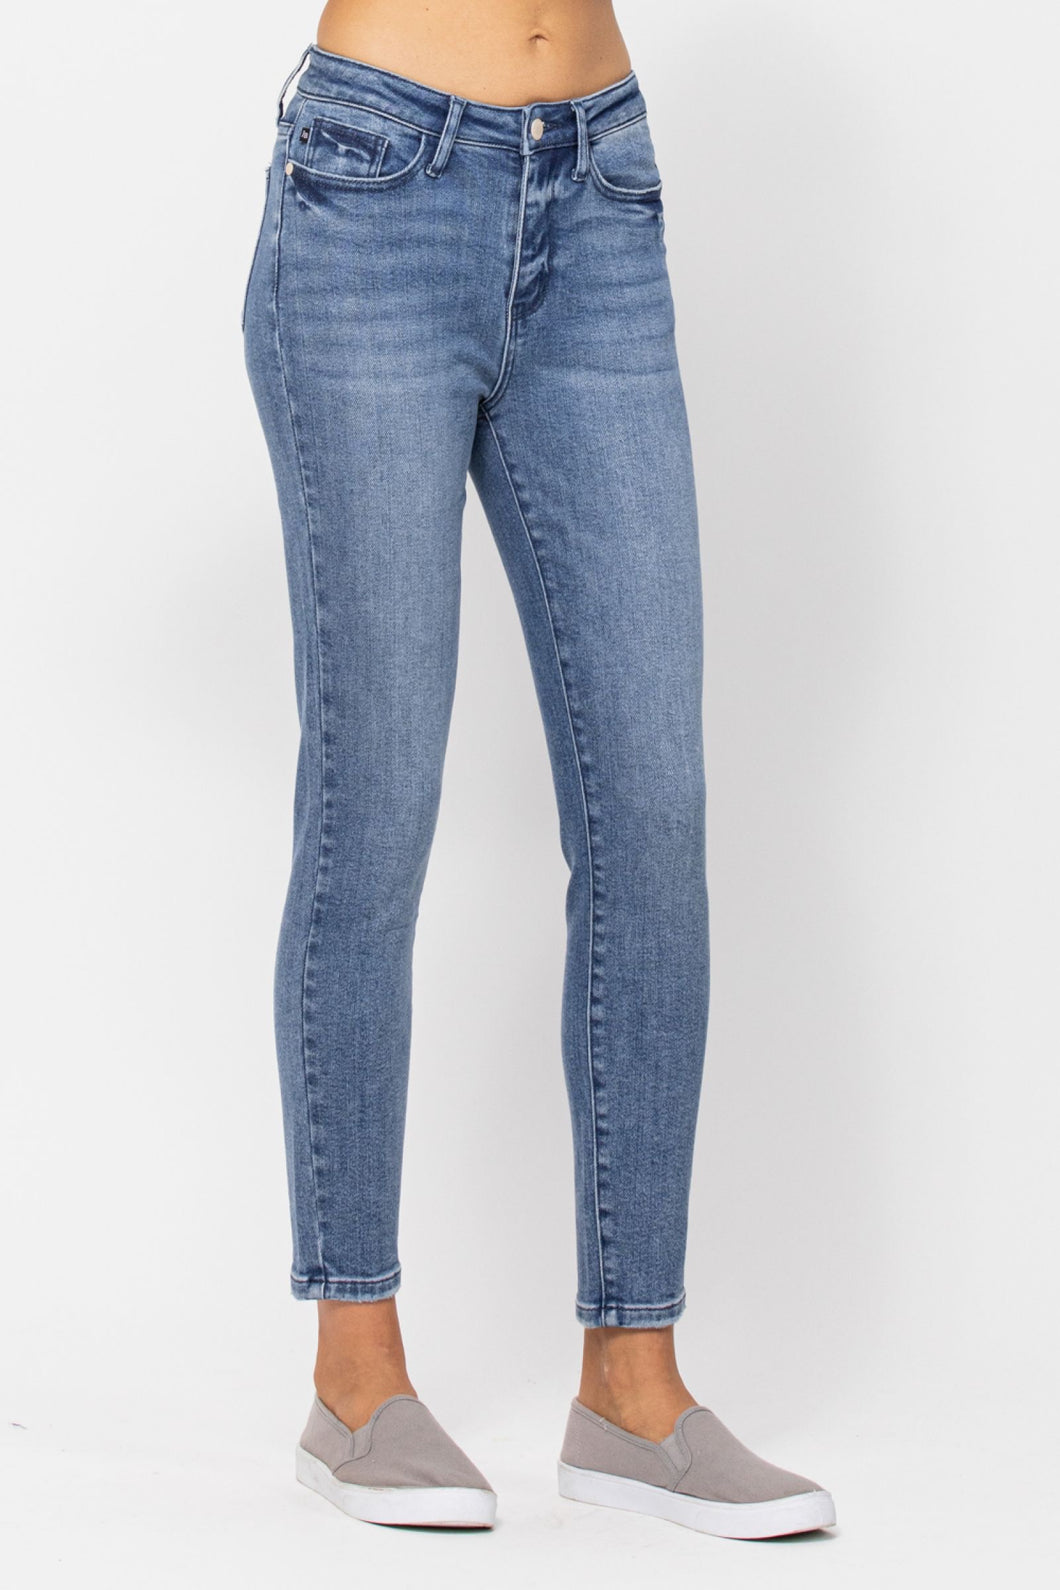 JUDY BLUE High Waist Relaxed Fit Skinny Jean